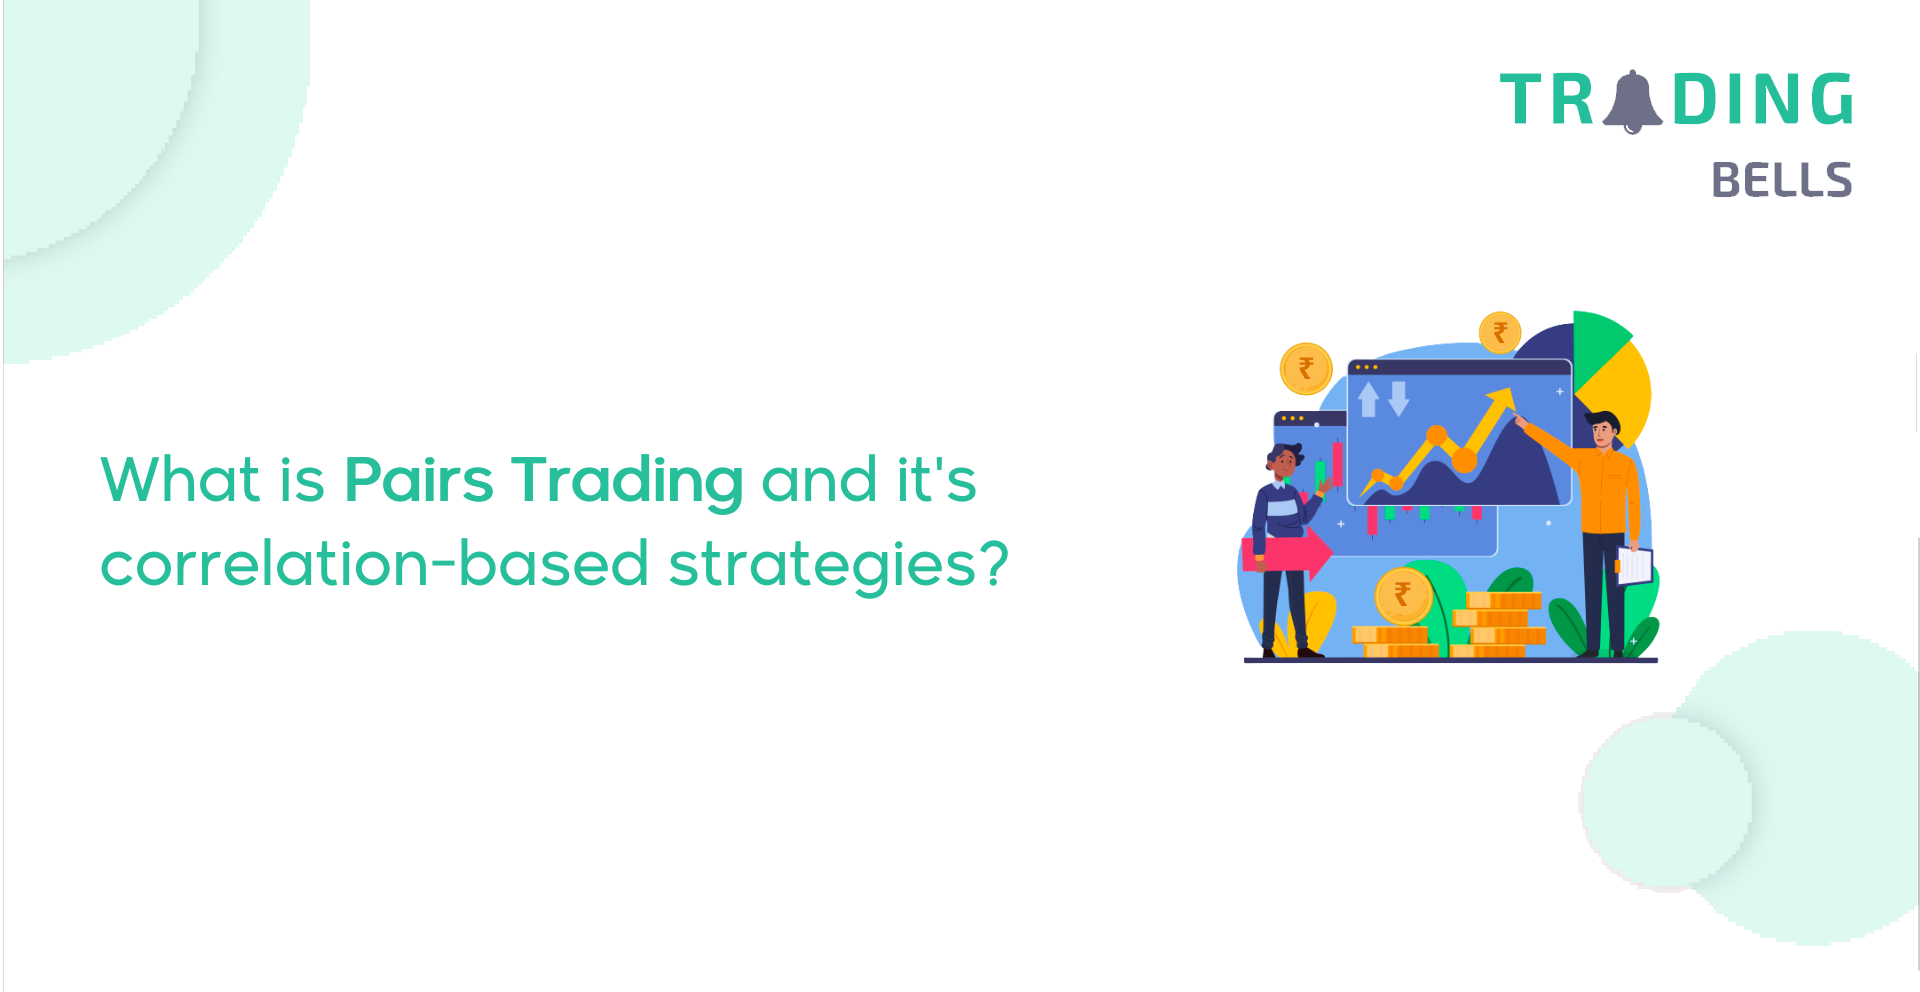 What is Pairs Trading and its correlation-based strategies?